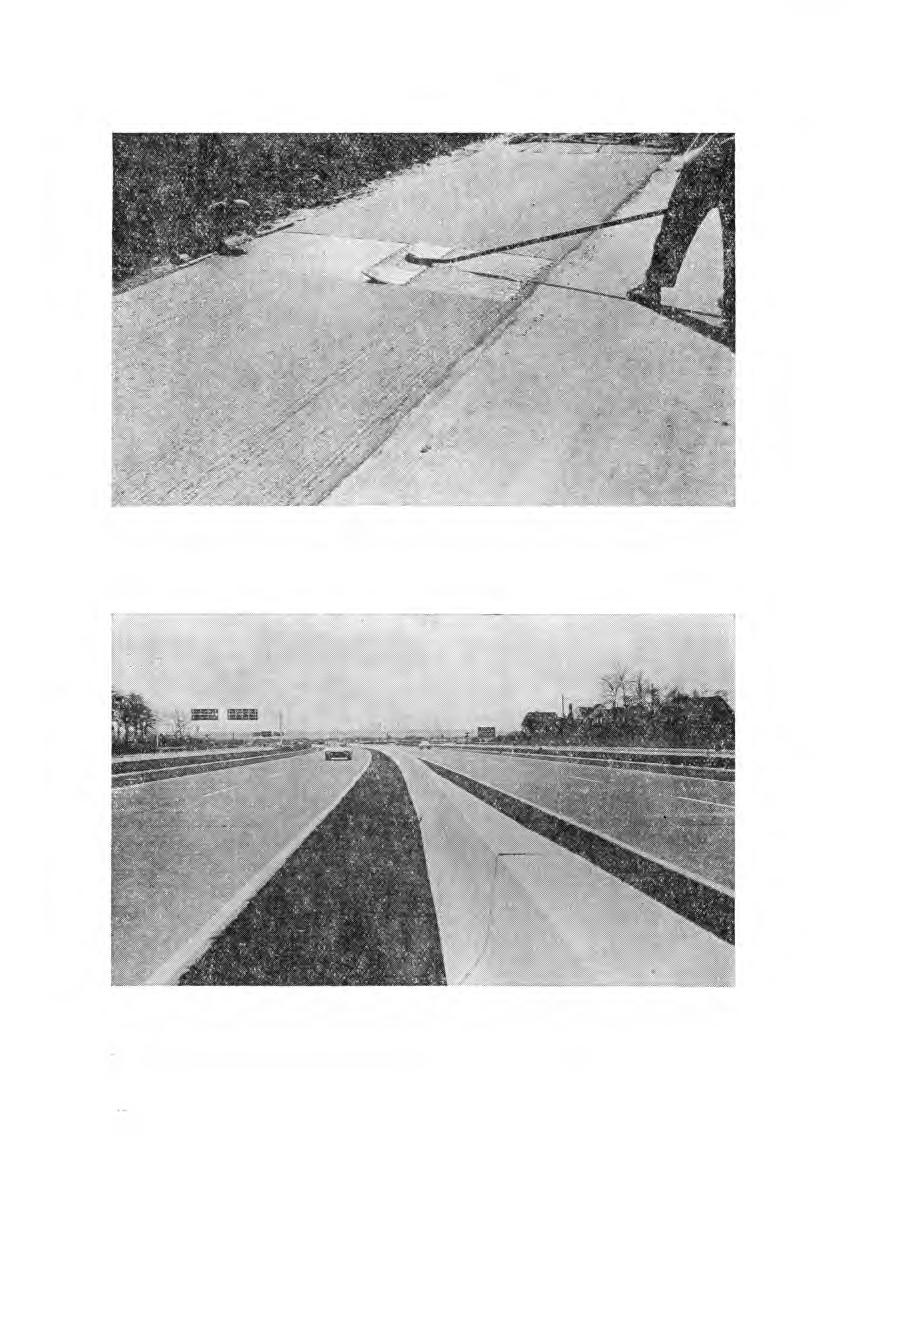 42 Fig. 11. Device for grooving concrete shoulders.